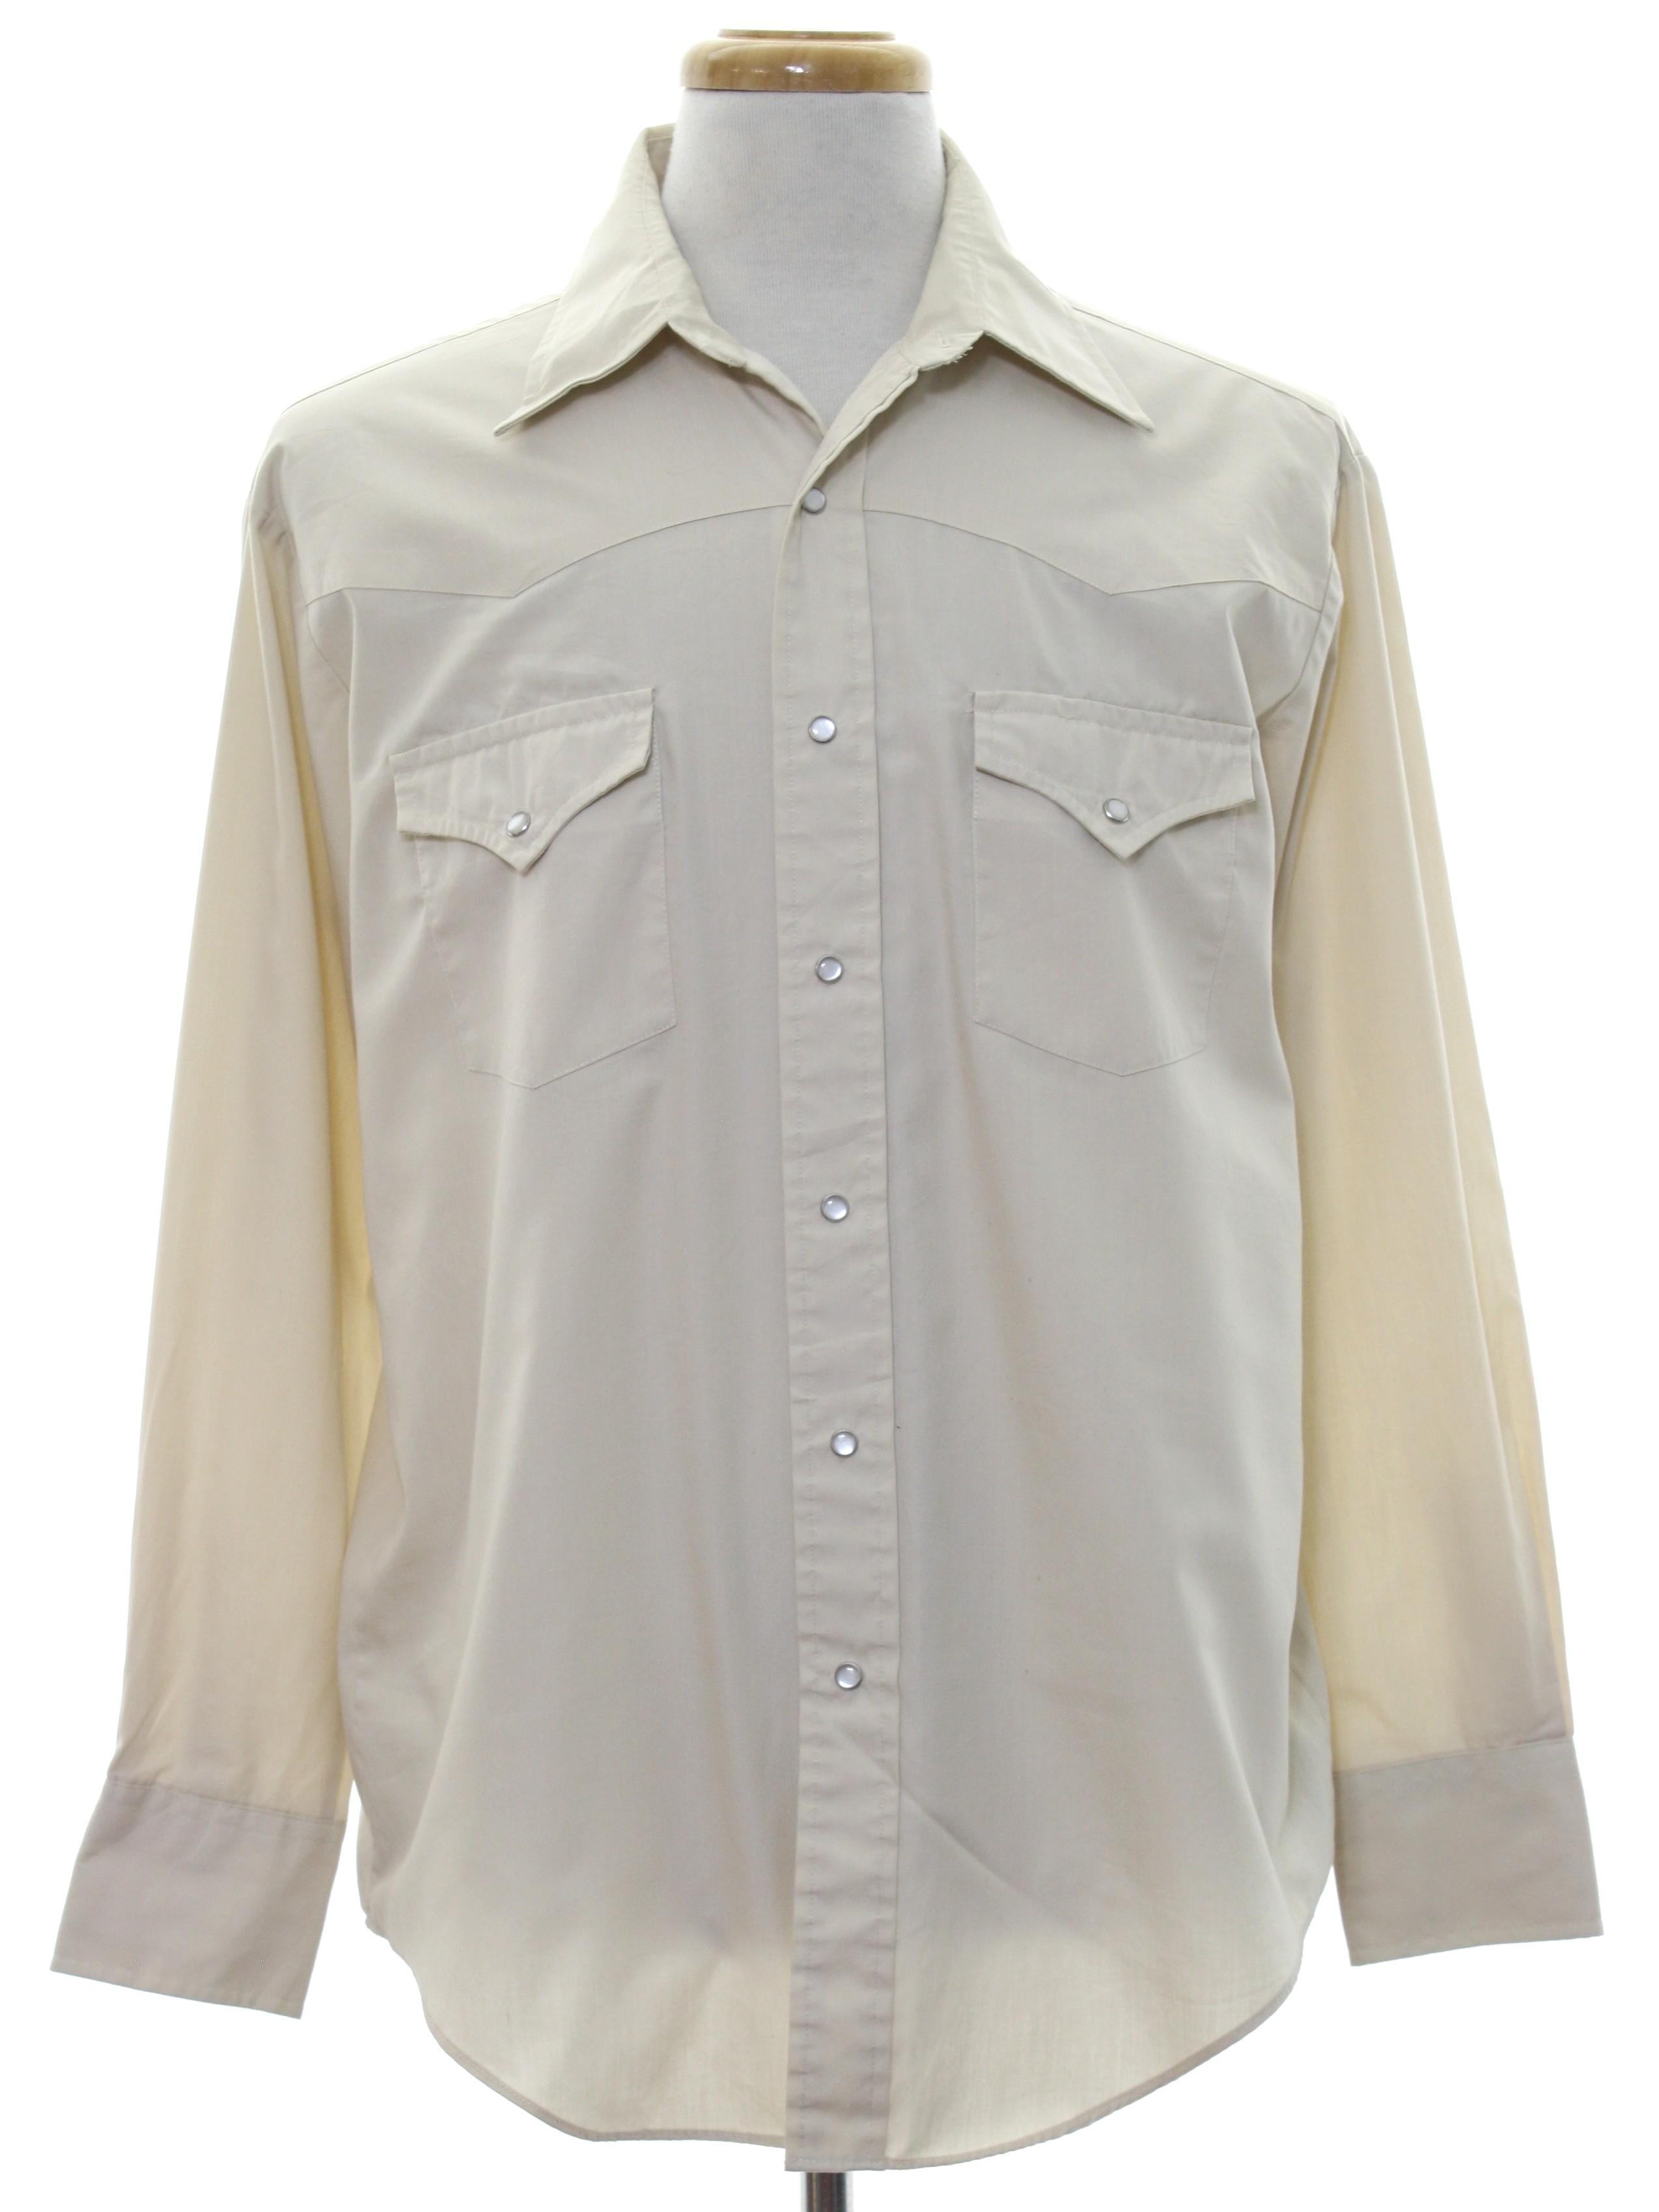 80s Retro Western Shirt: 80s -Larial- Mens Cream background polyester ...